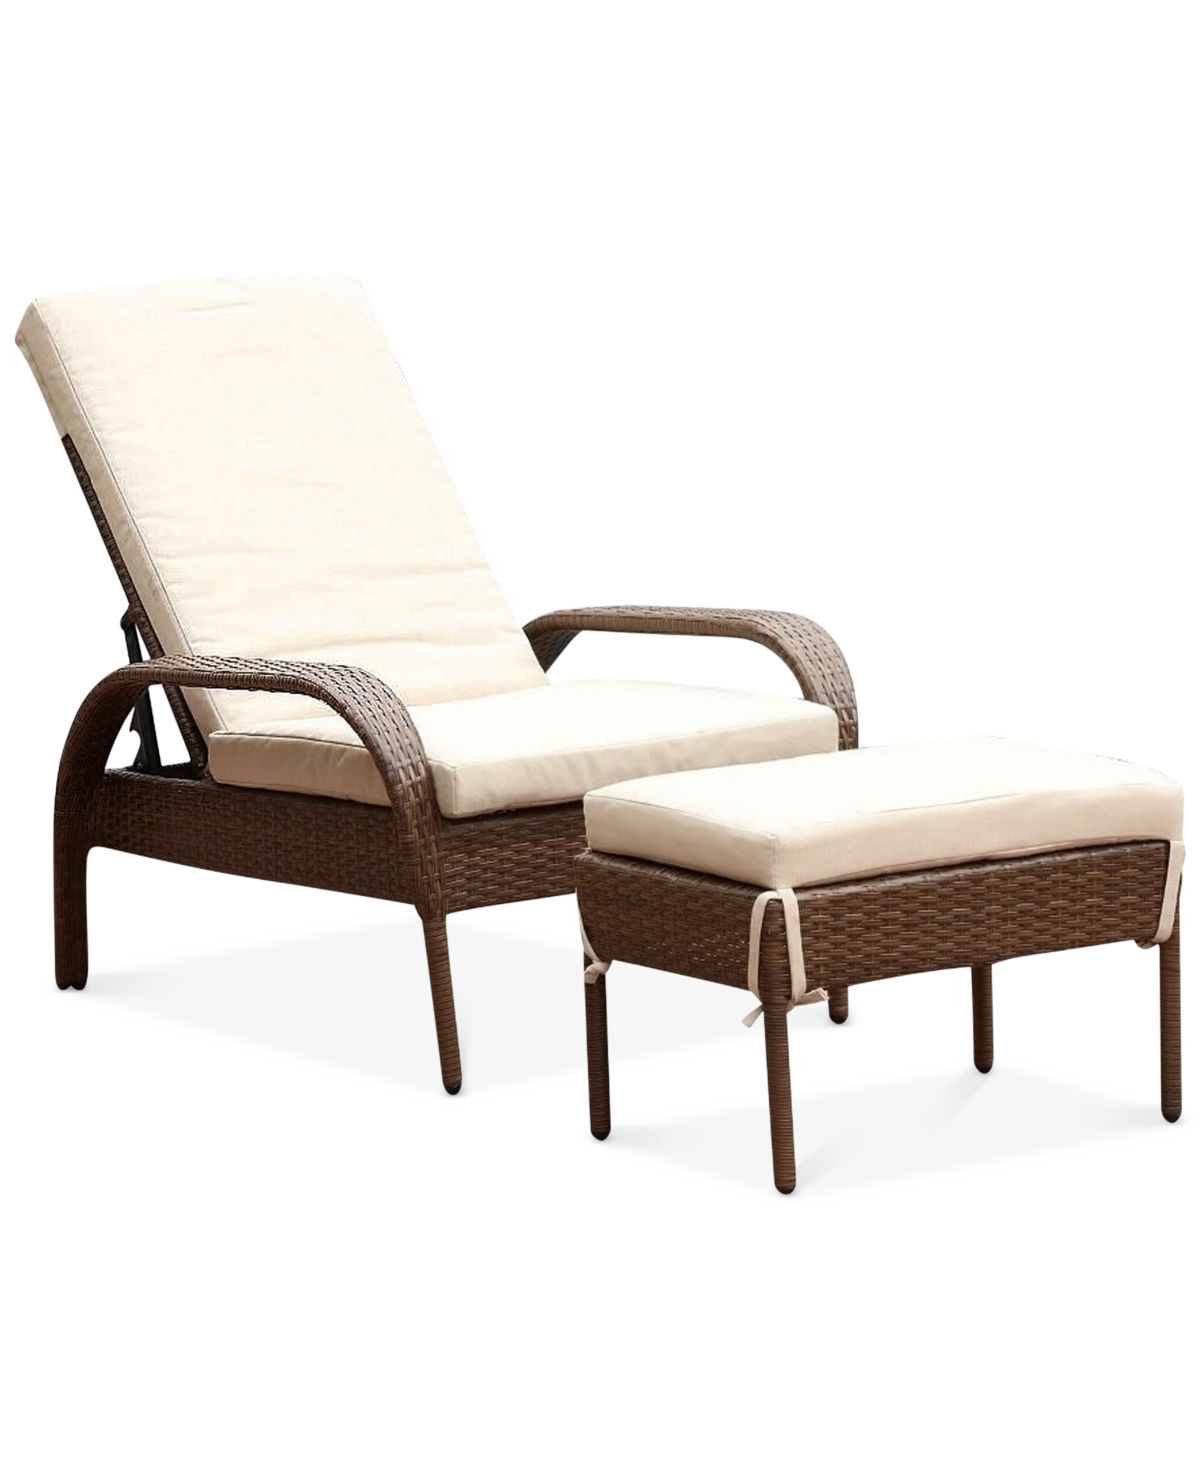 Heather Outdoor Wicker Chaise Lounge w/Cushion